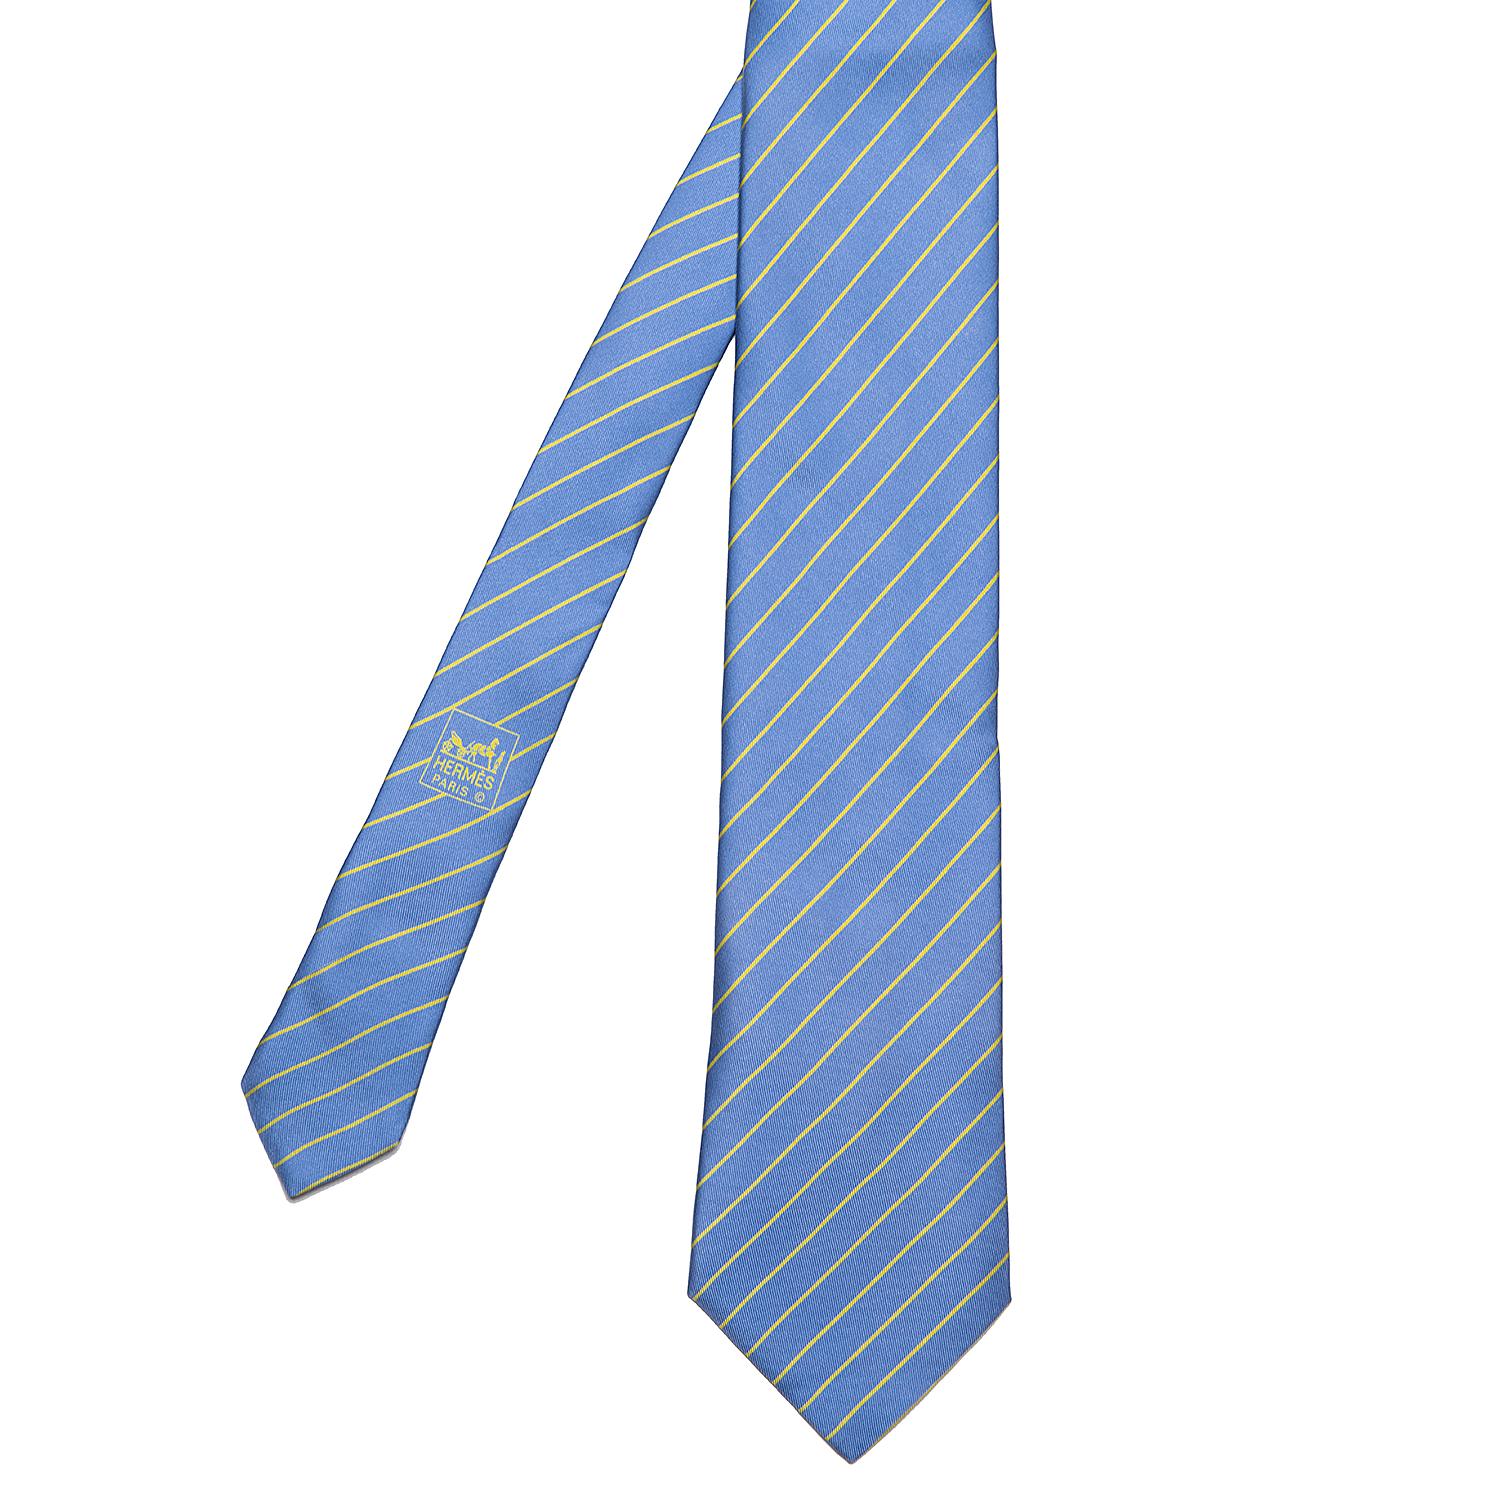 A superb Vintage Hermes Silk Tie, with Yellow diagonal Stripes on a Cambridge Blue ground. In pristine condition.  